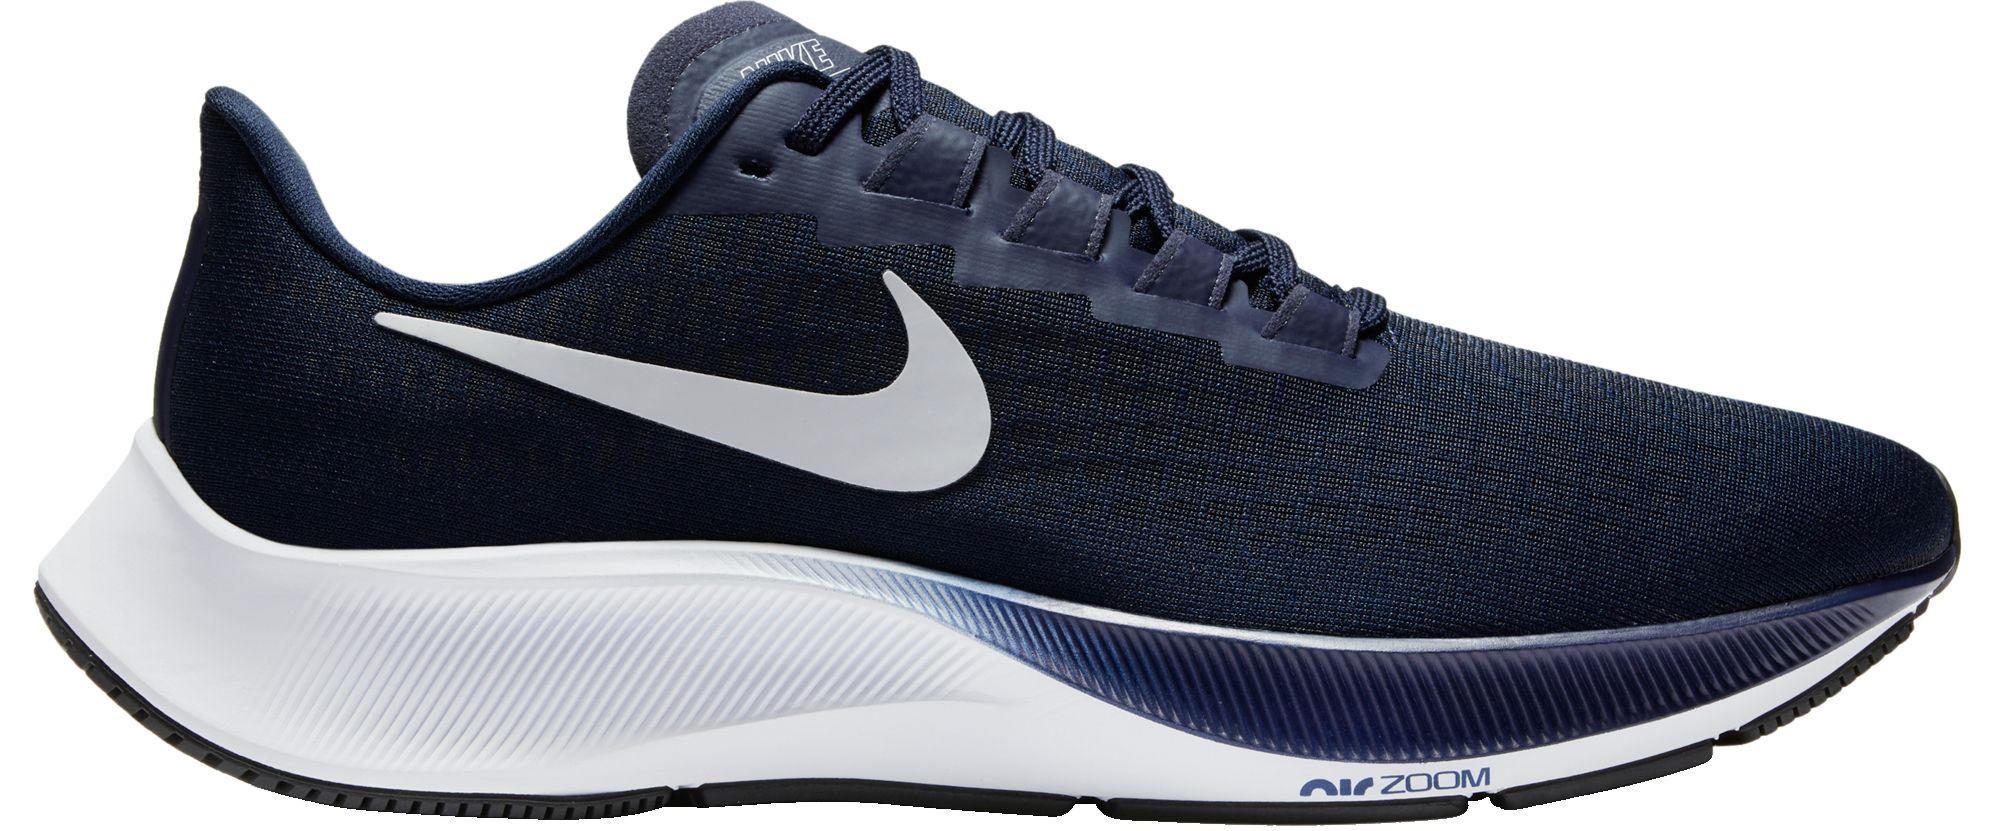 Nike Air Zoom Pegasus 37 Running Shoes in Navy/White (Blue) for Men - Lyst